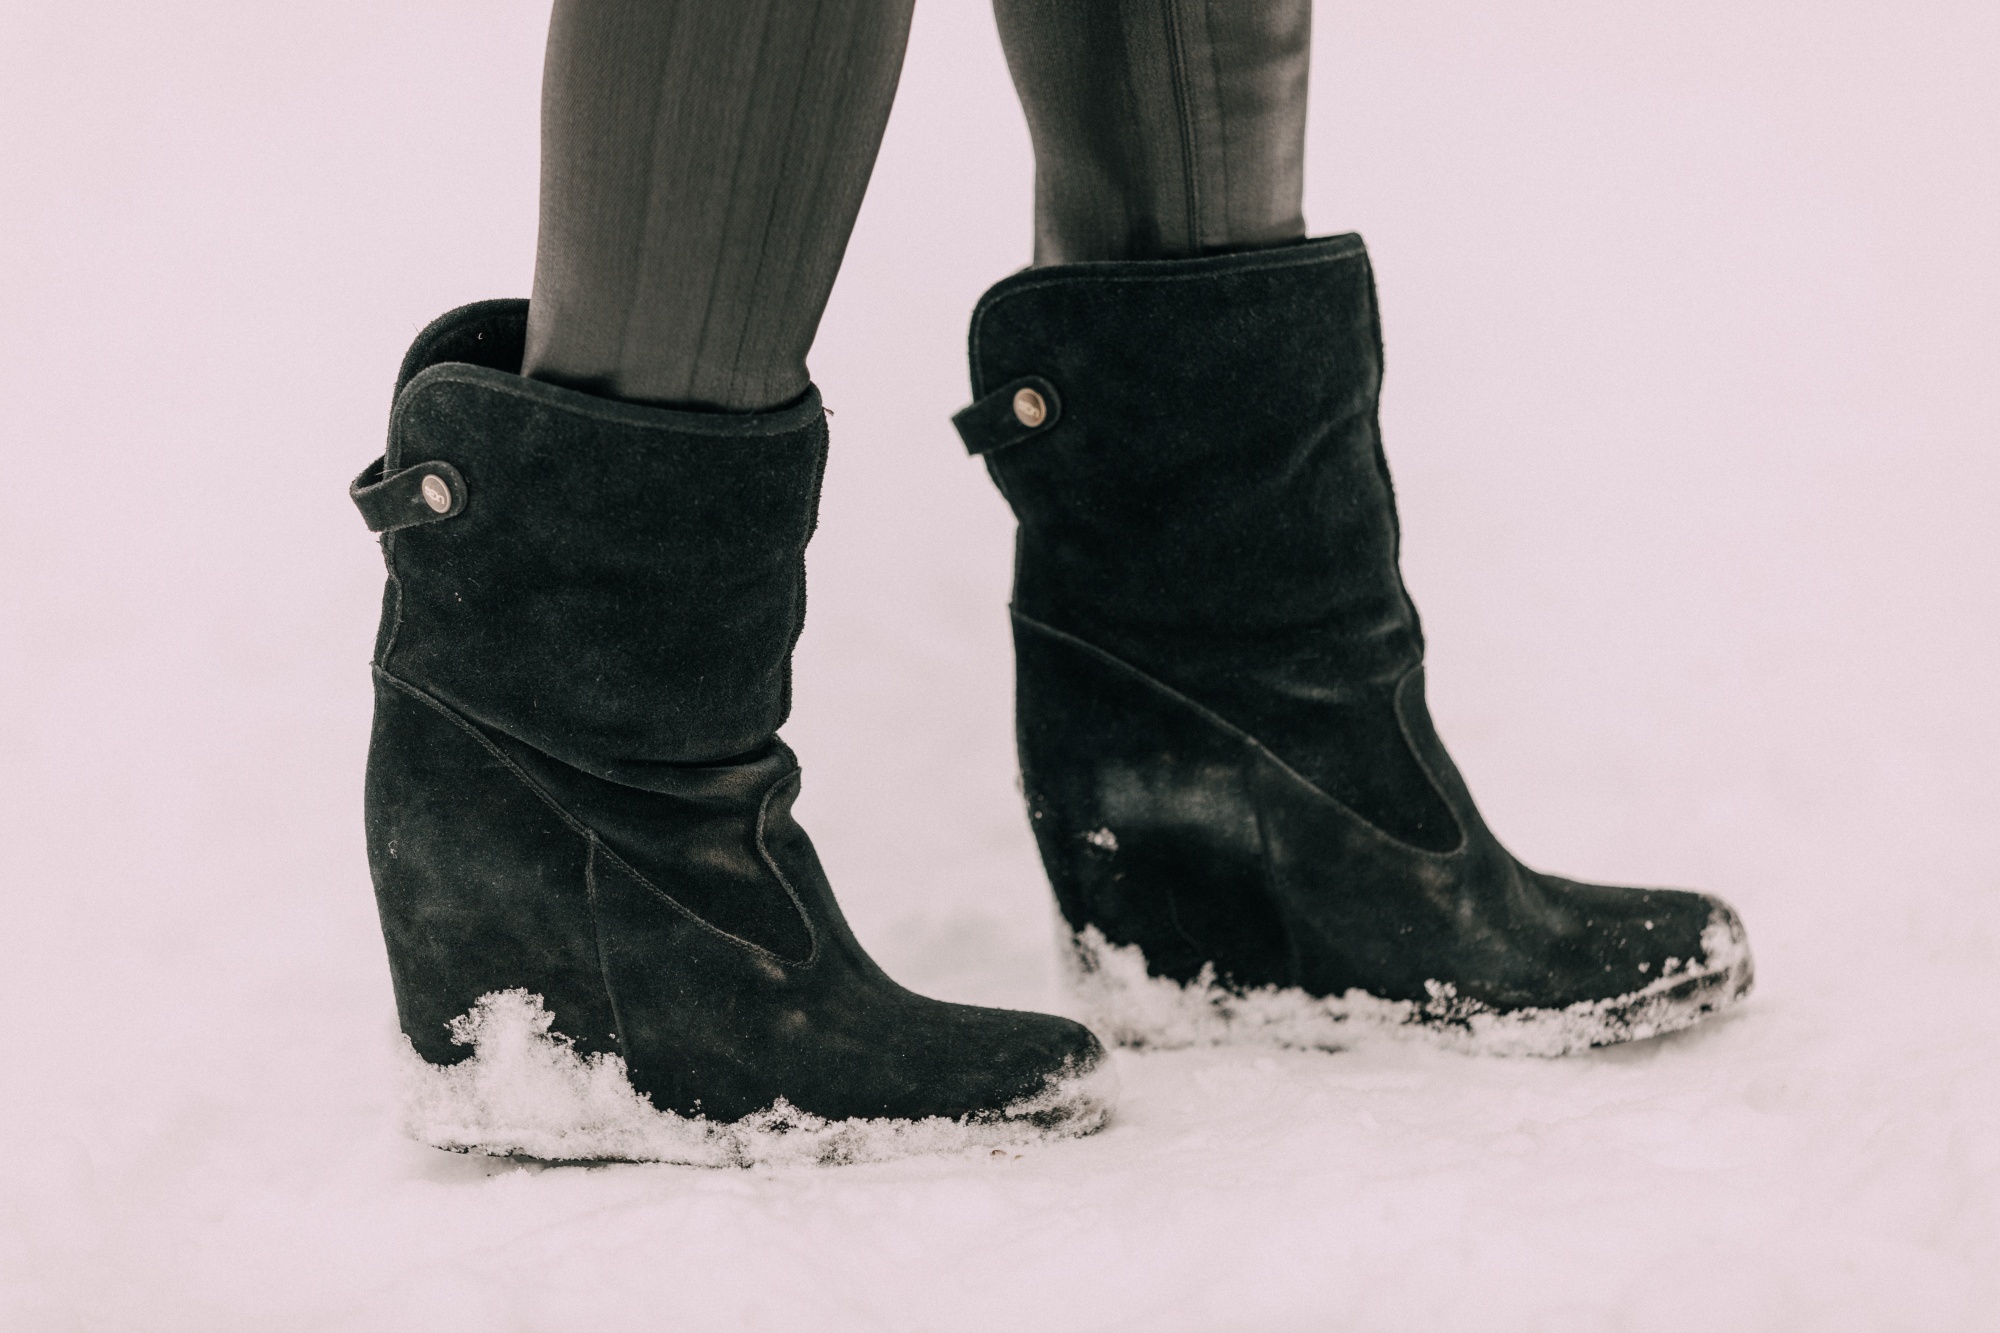 black wedge ugg boots to wear in cold weather, erin busbee fashion blogger over 40, cold weather accessories